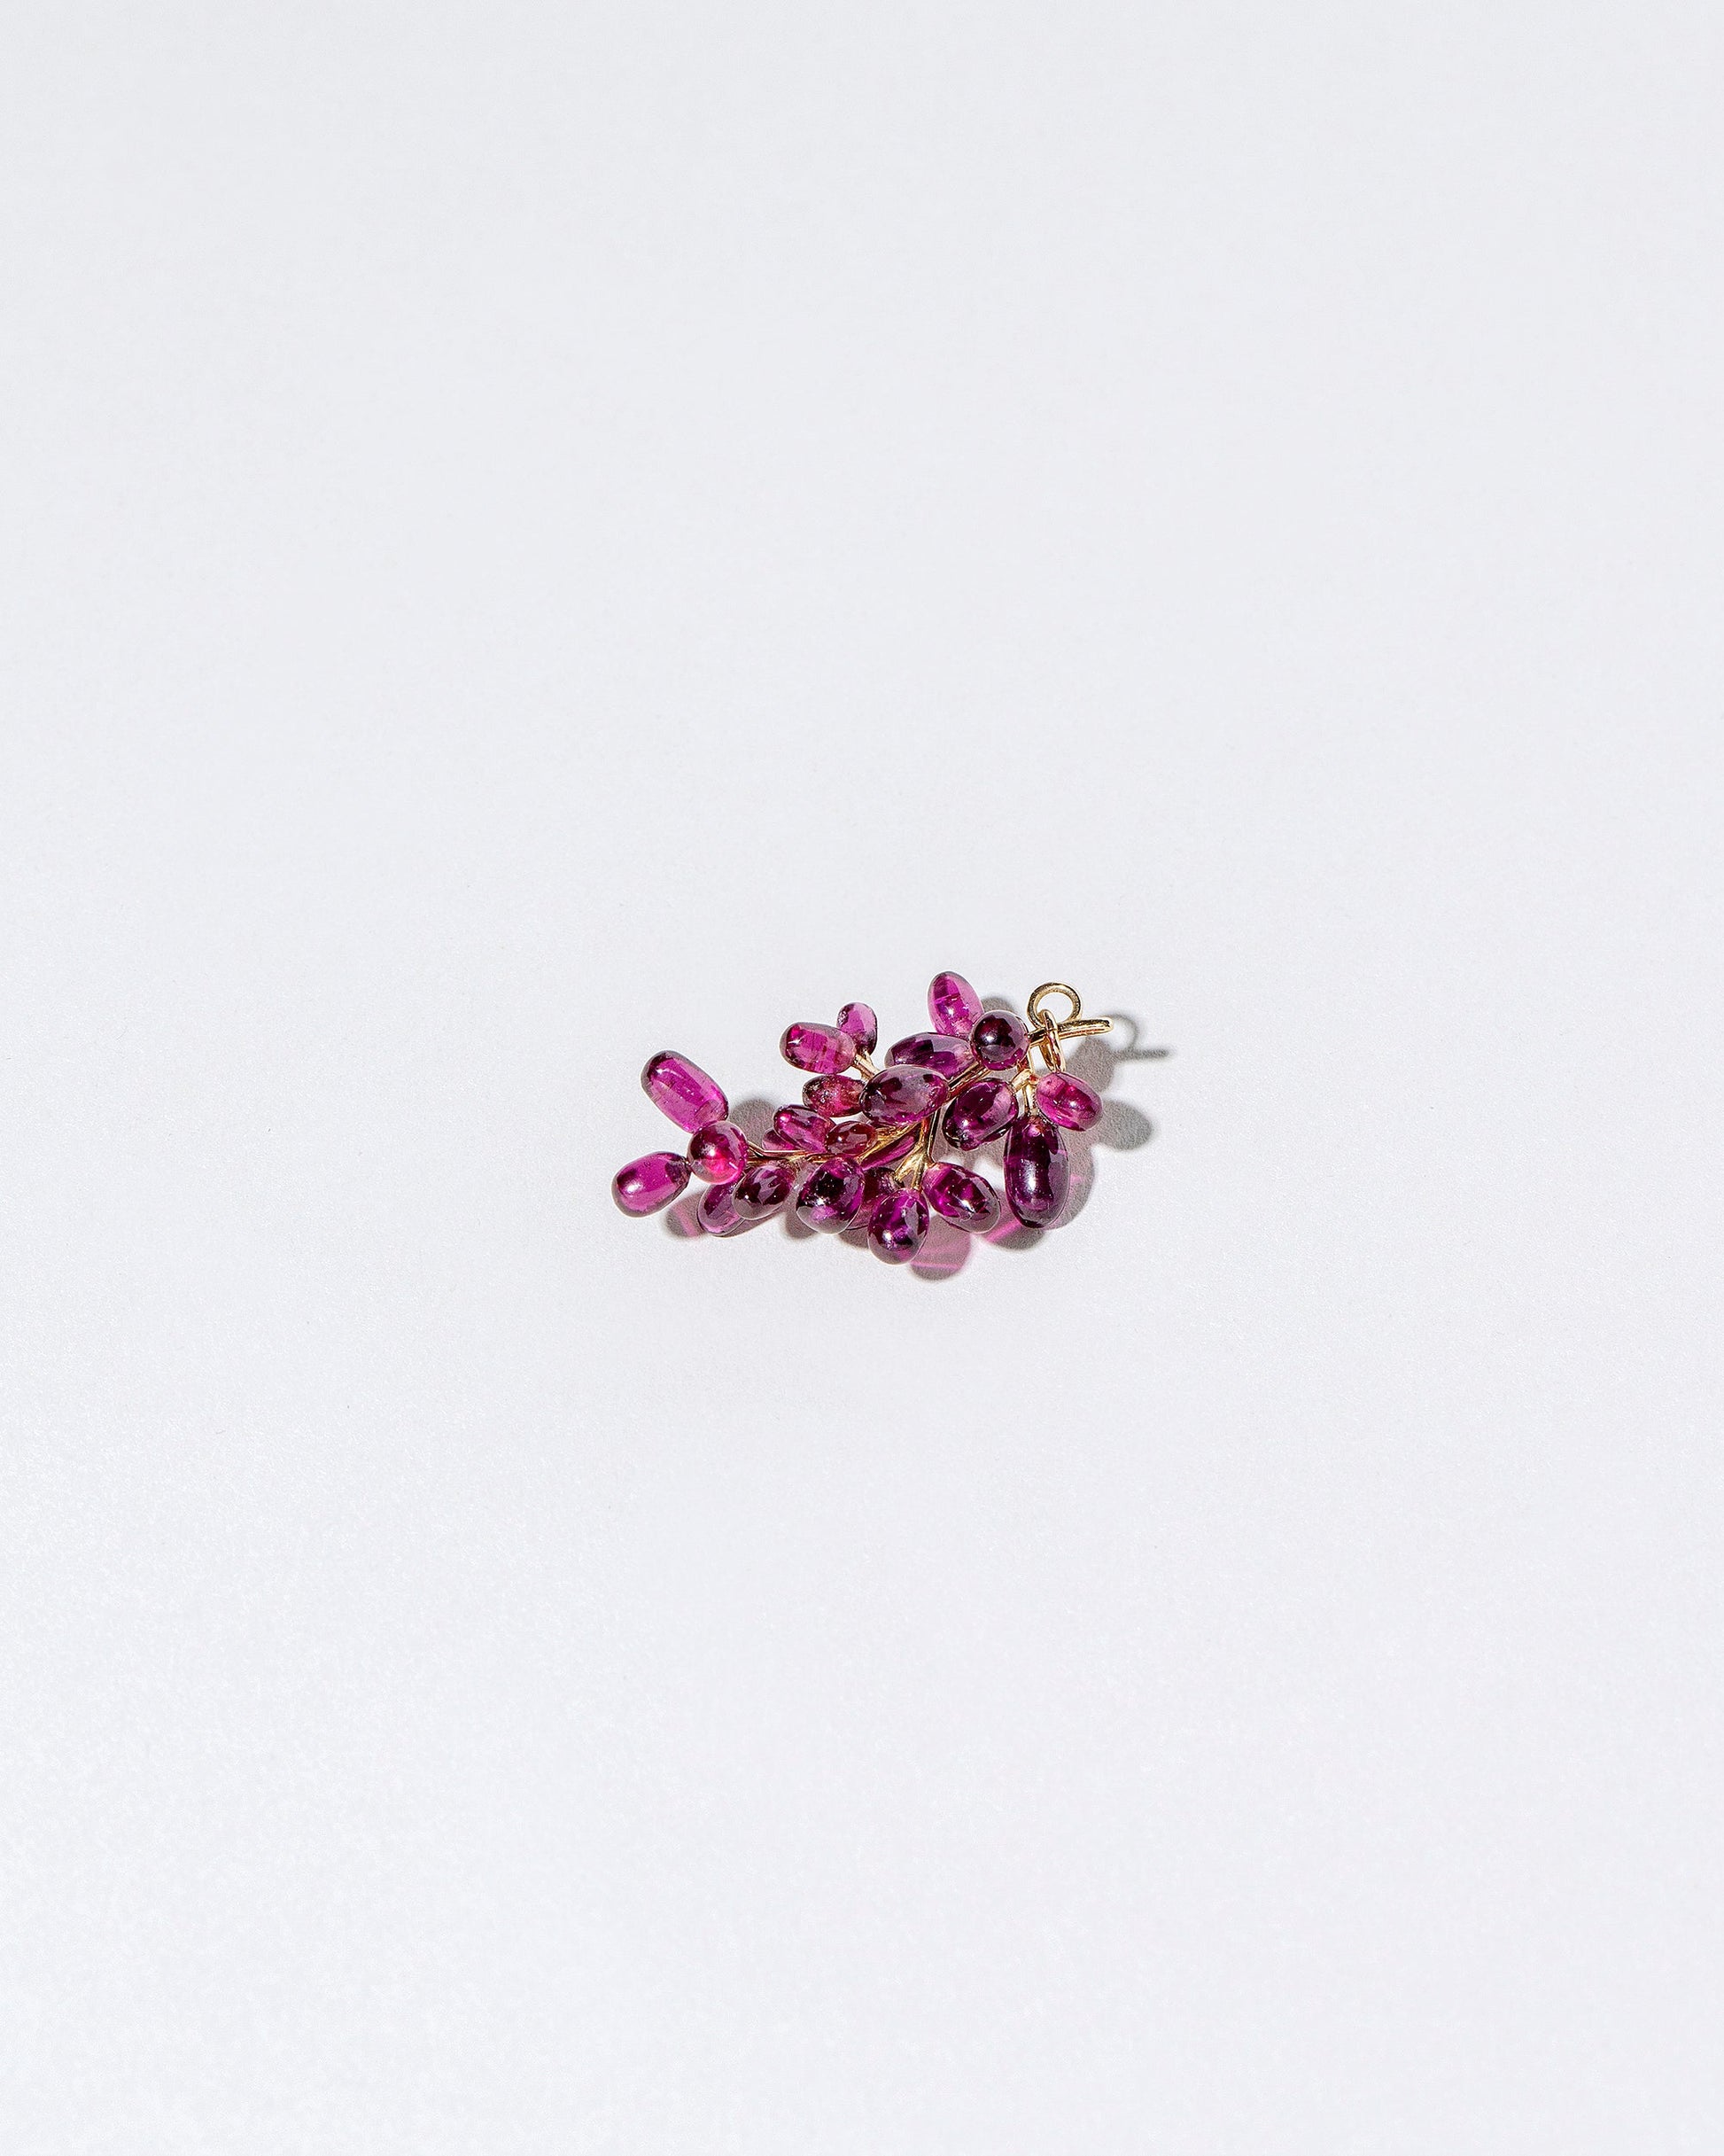  Table Grapes Charm on light color background.